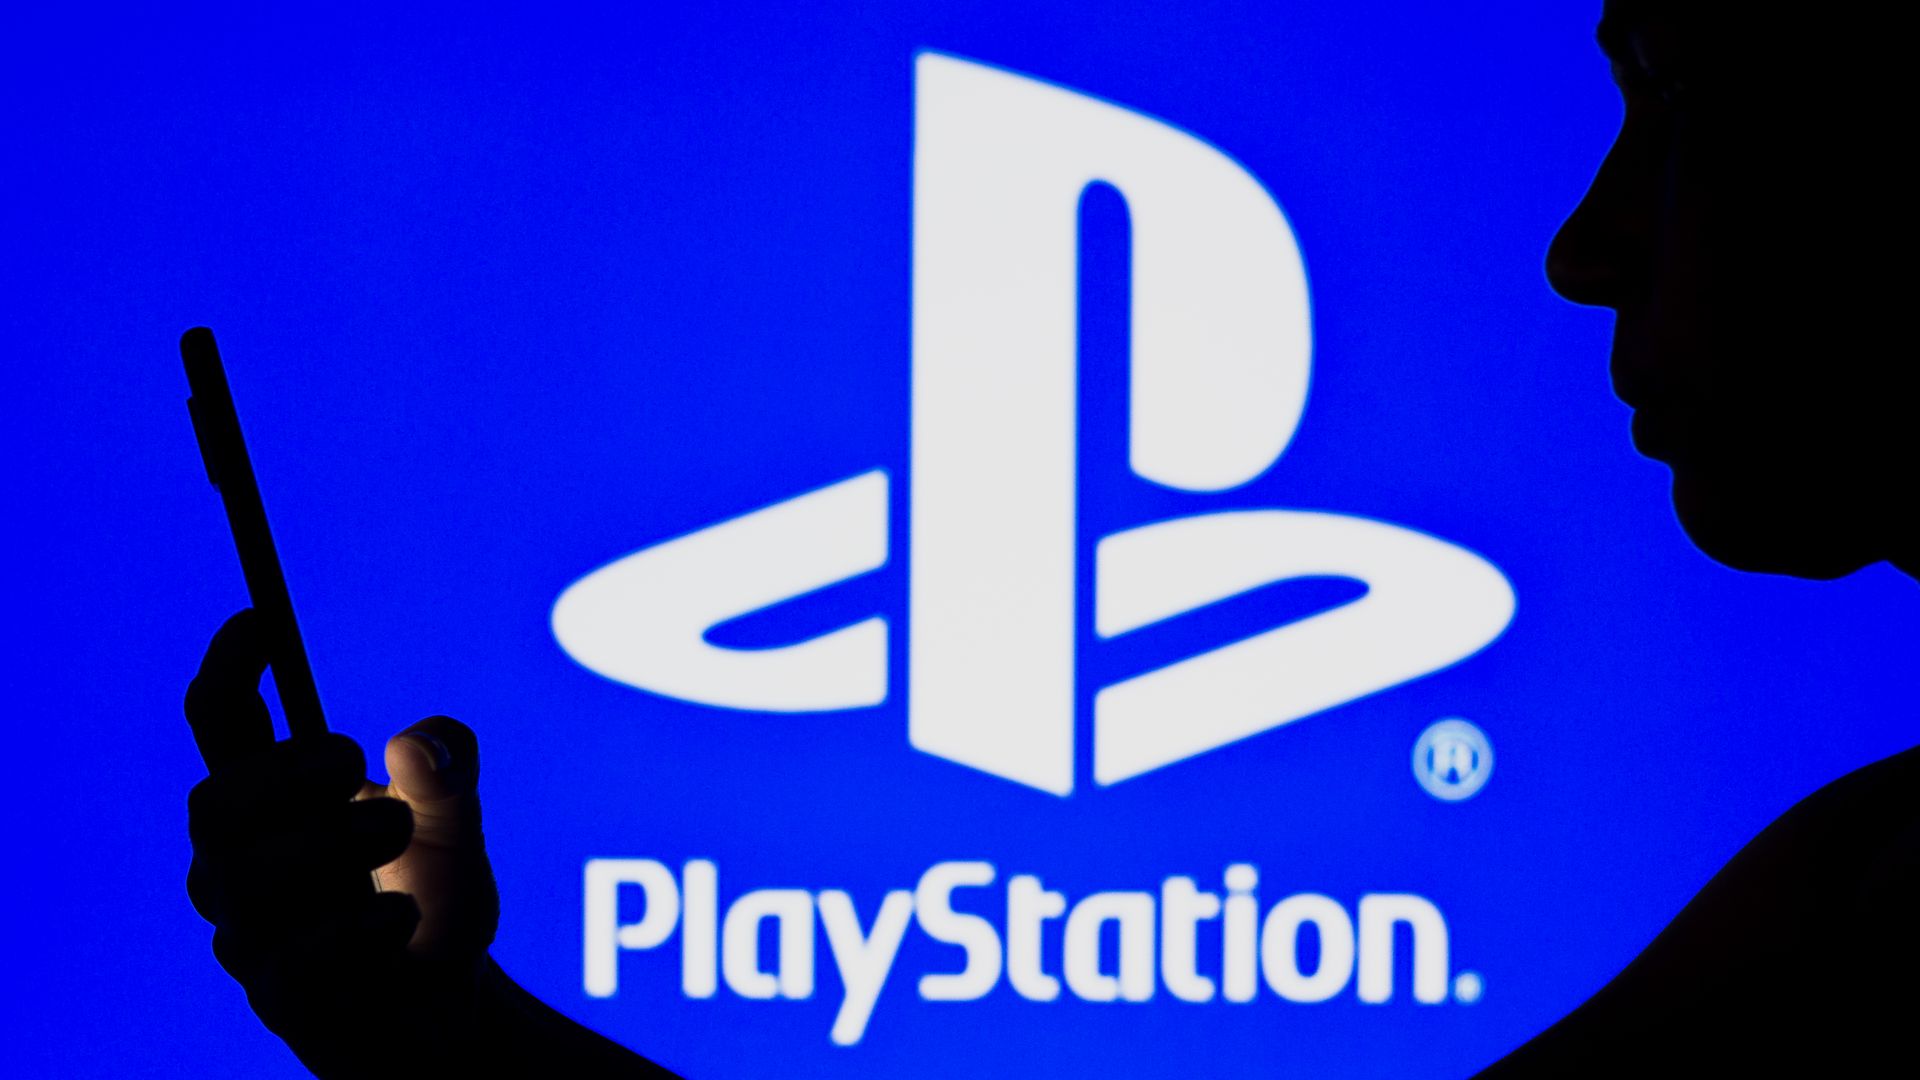 Image of the PlayStation logo and a woman seen in silhouette 